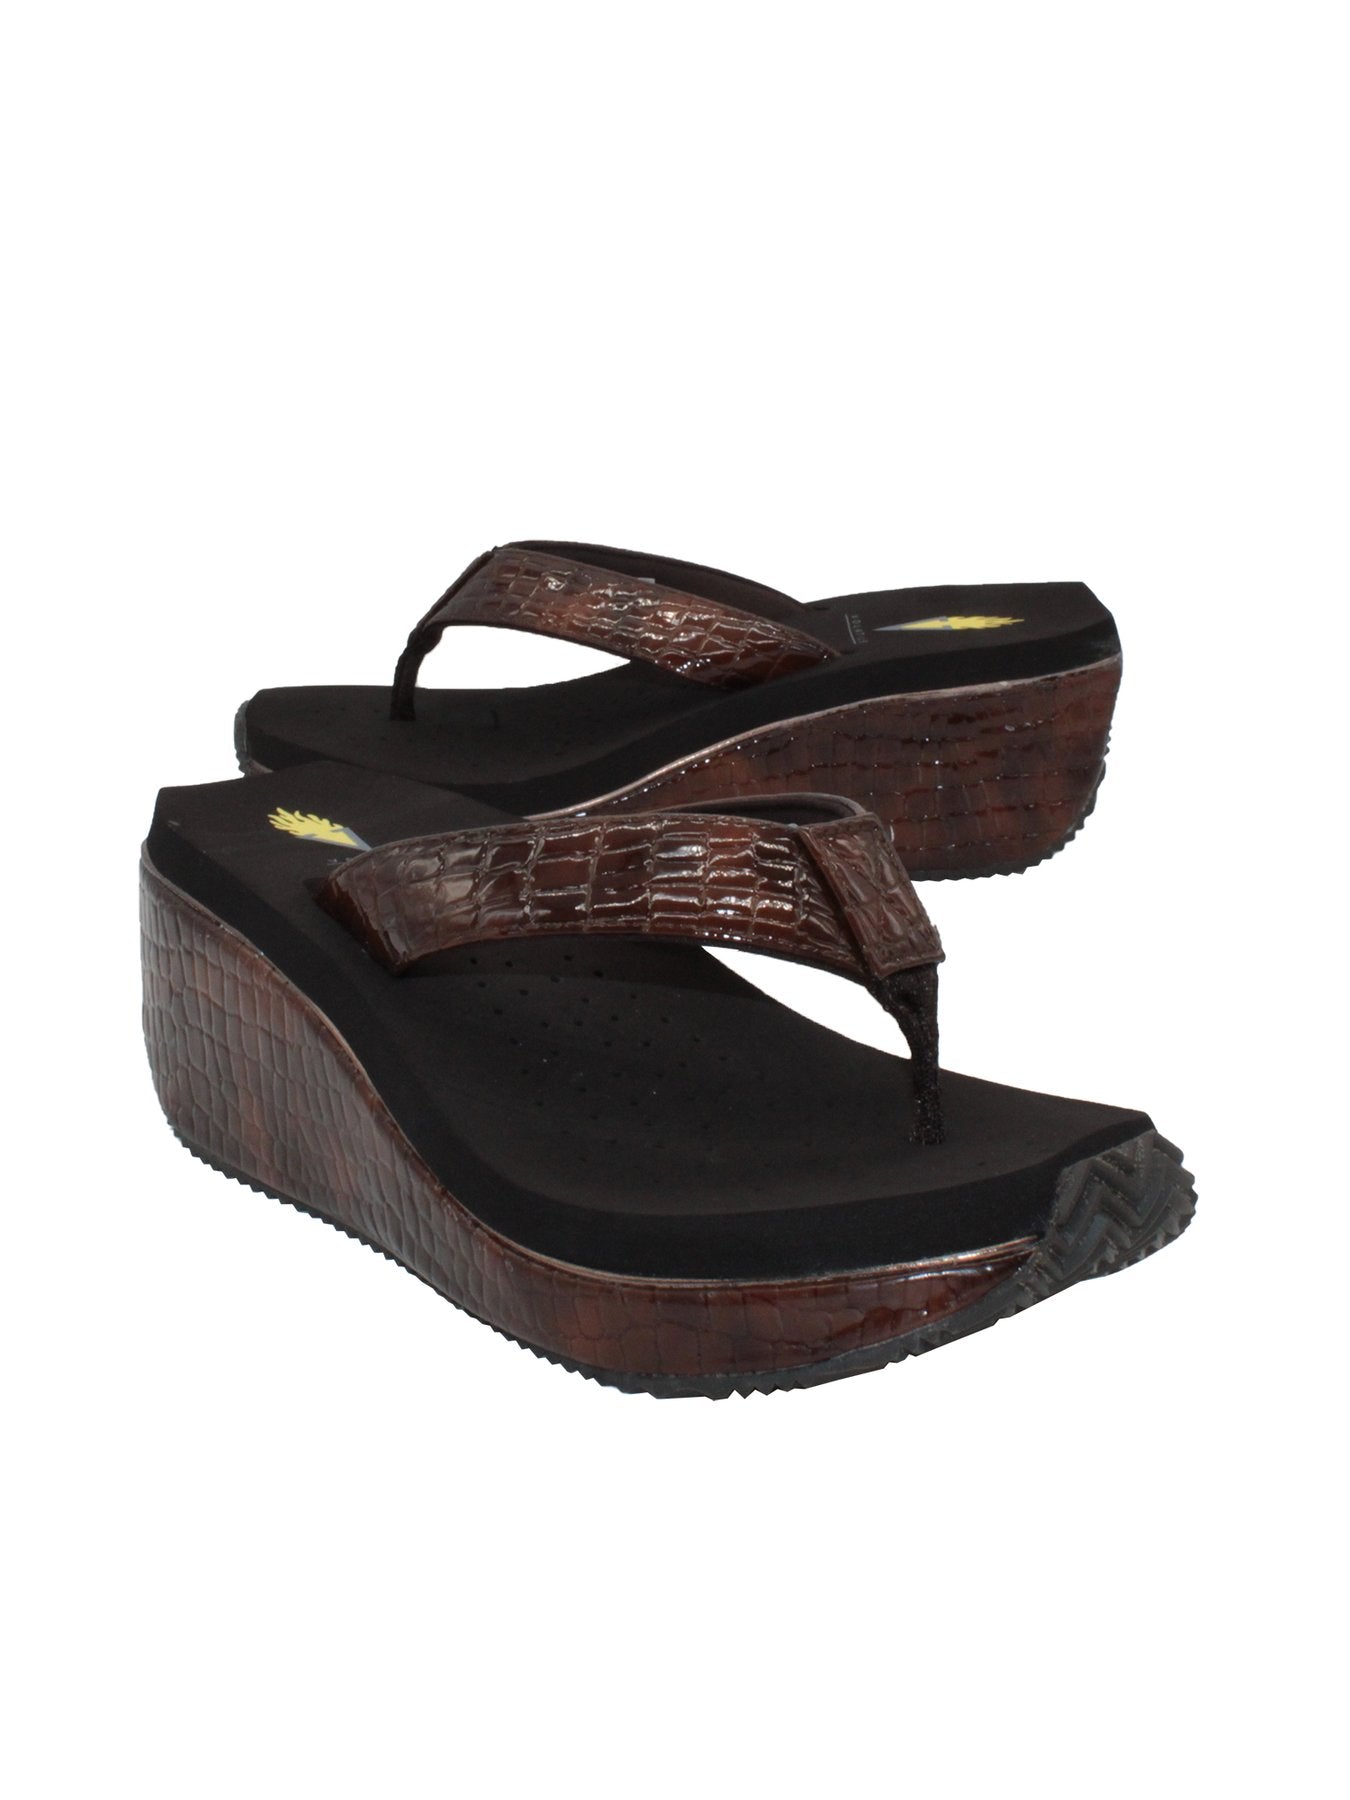 Volatile Shoes Volatile Frappachino Leather Thong Sandal - Little Miss Muffin Children & Home